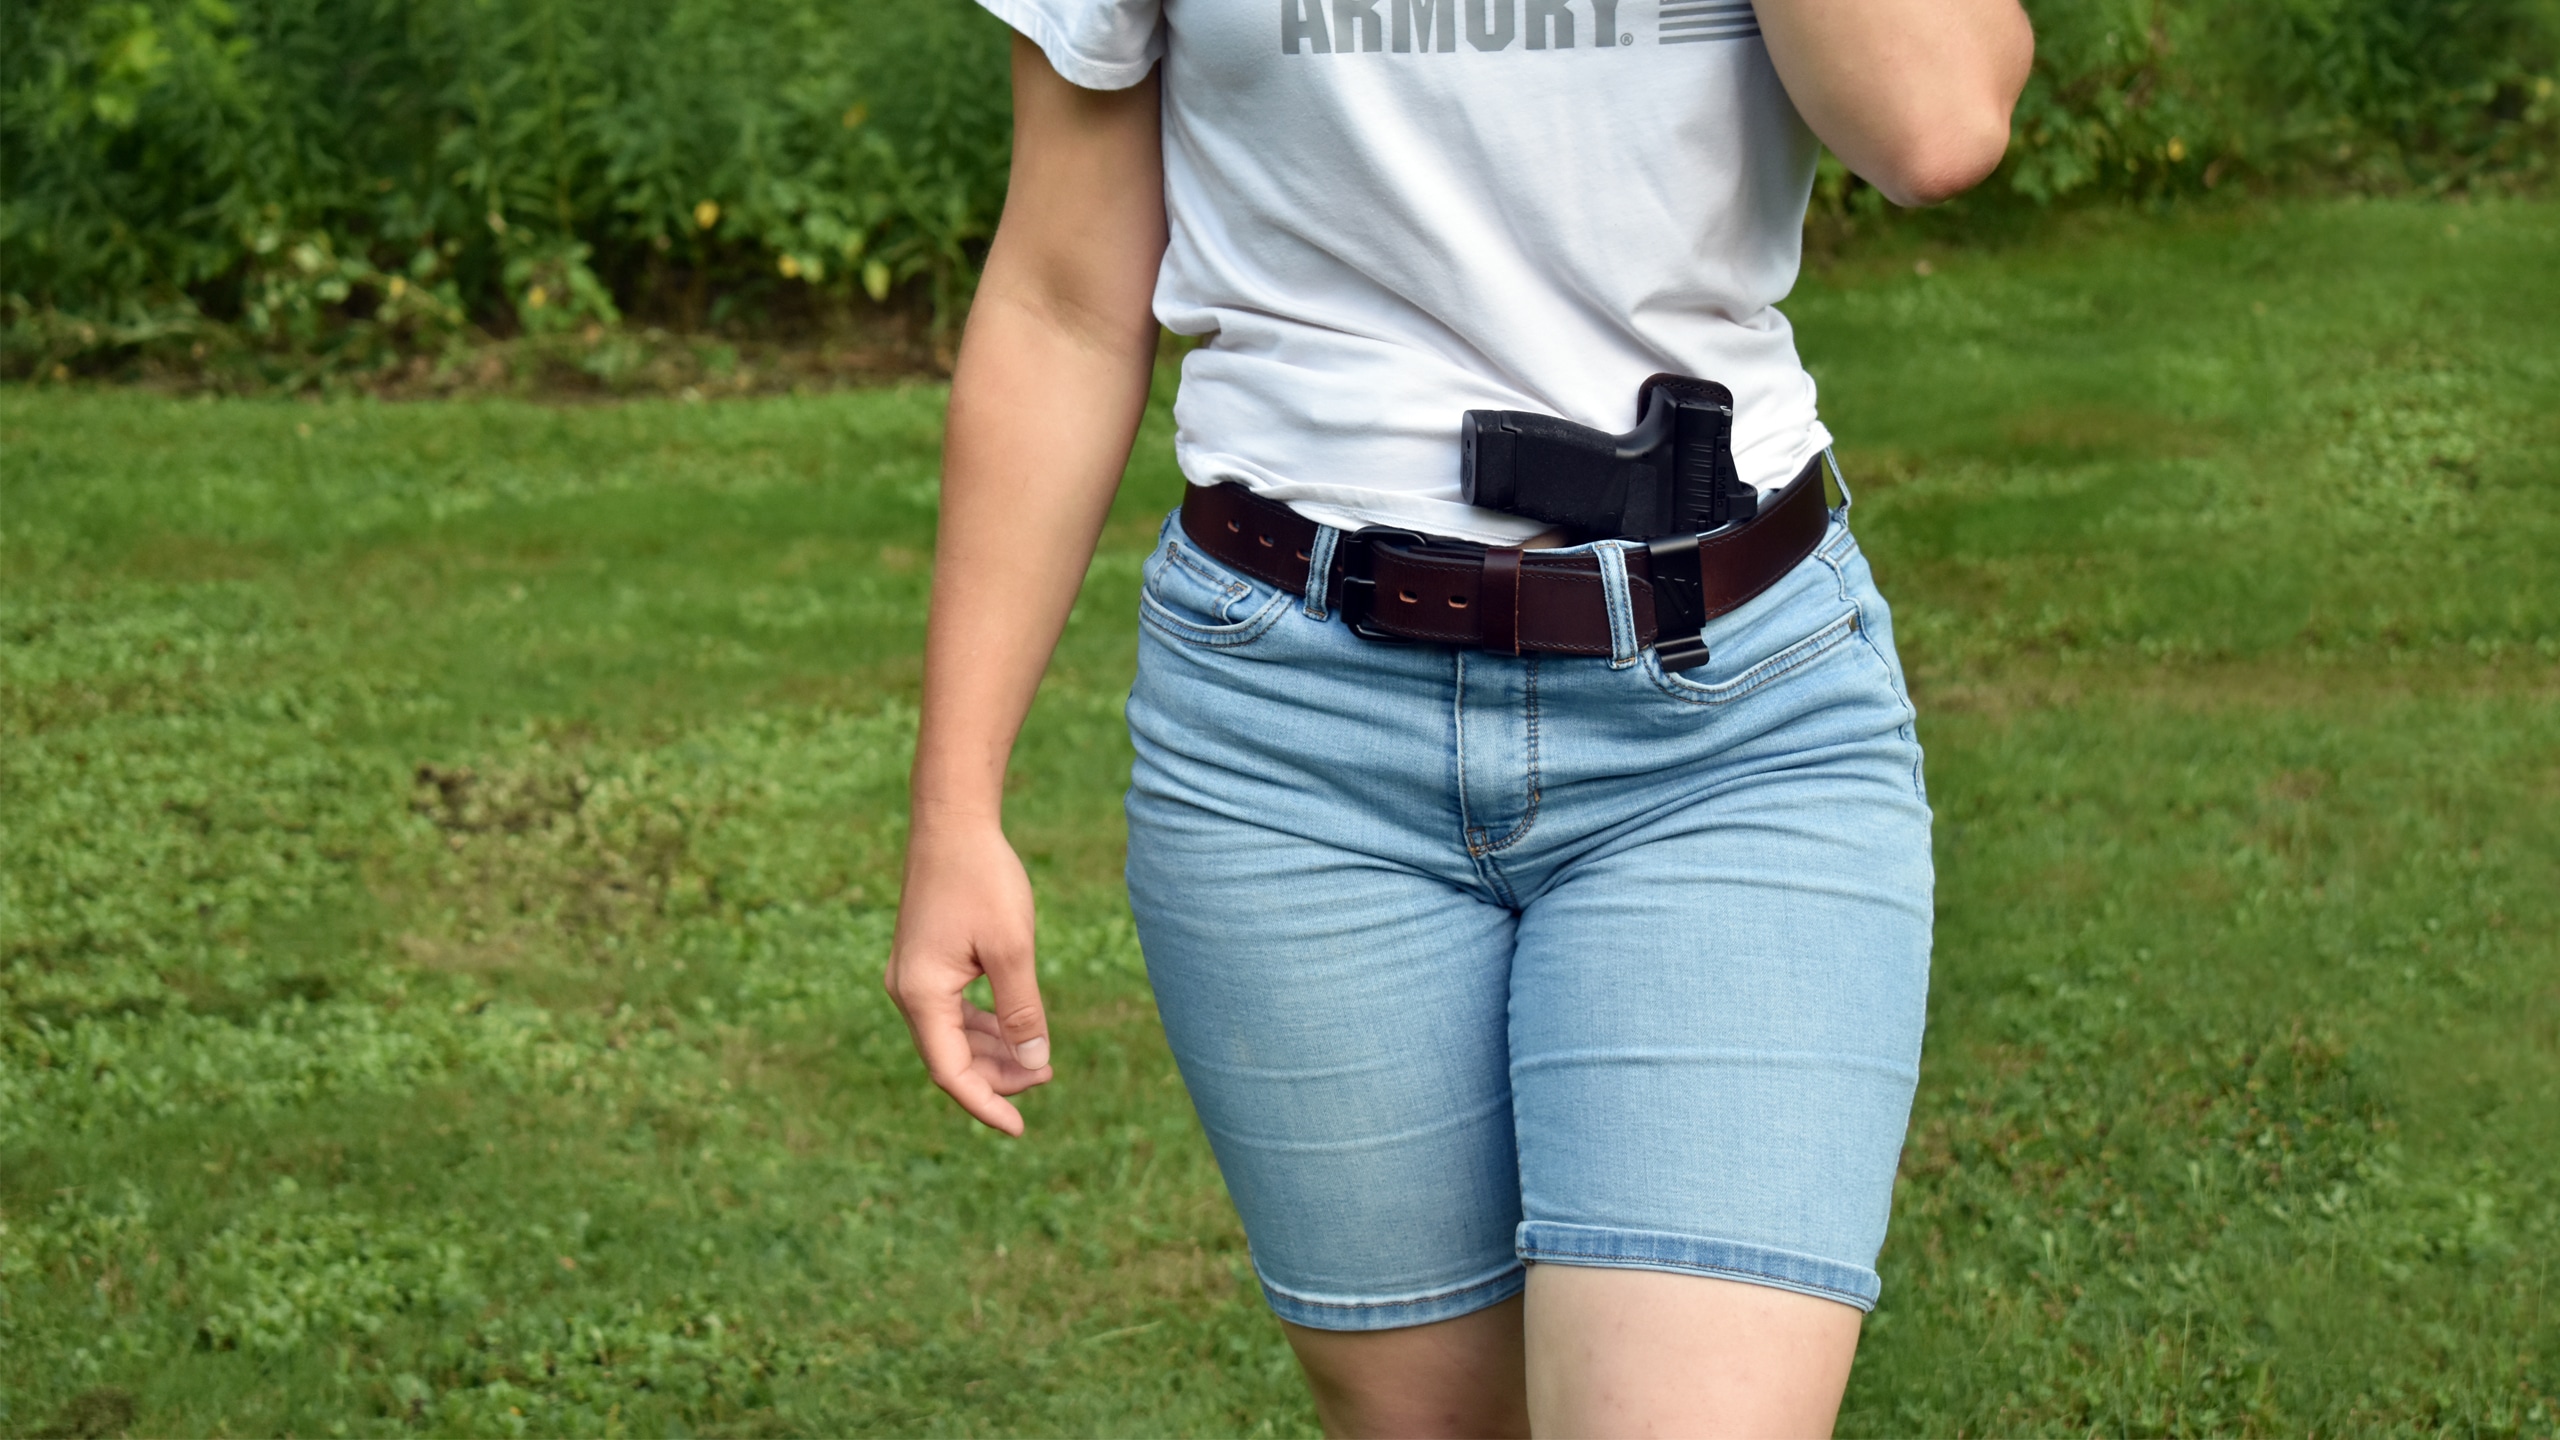 A Woman's Guide to Not Making a Gun Belt Mistake - The Armory Life